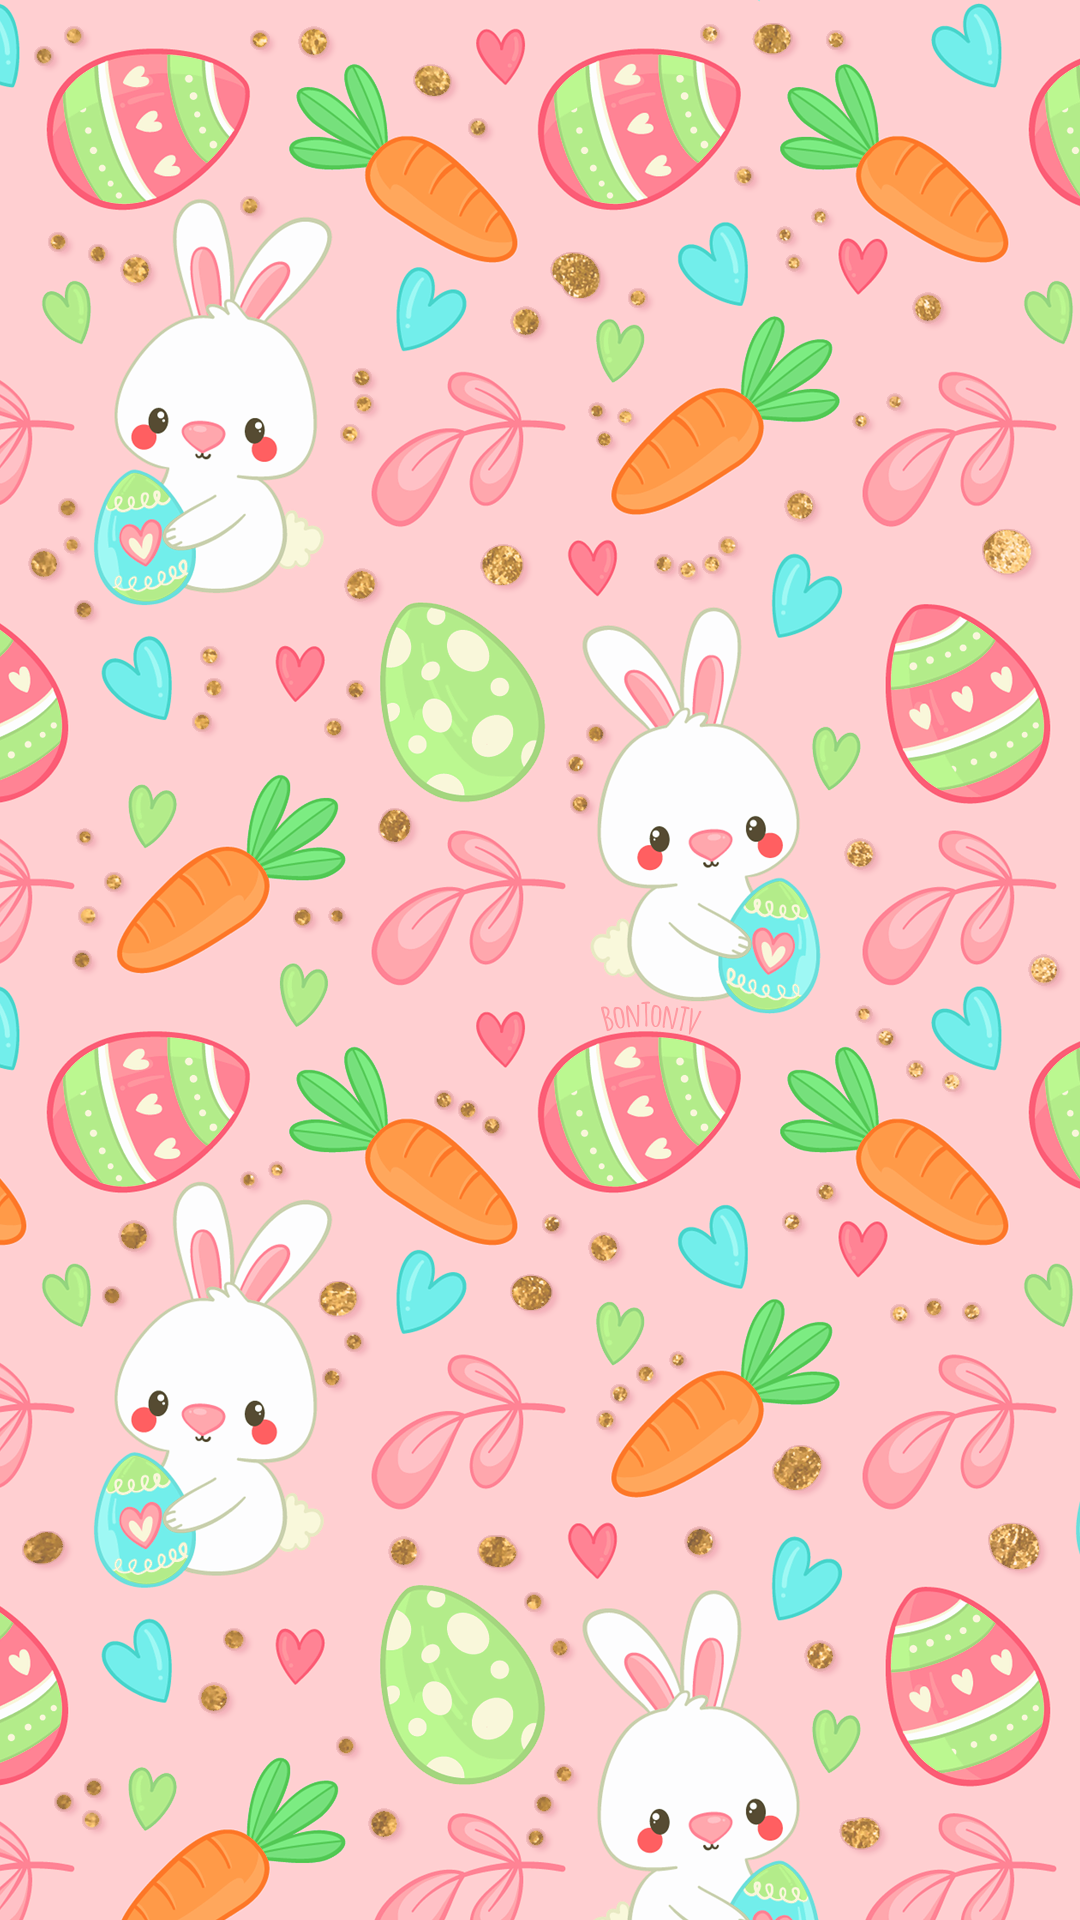 Green Cute Easter Background Wallpaper Image For Free Download  Pngtree